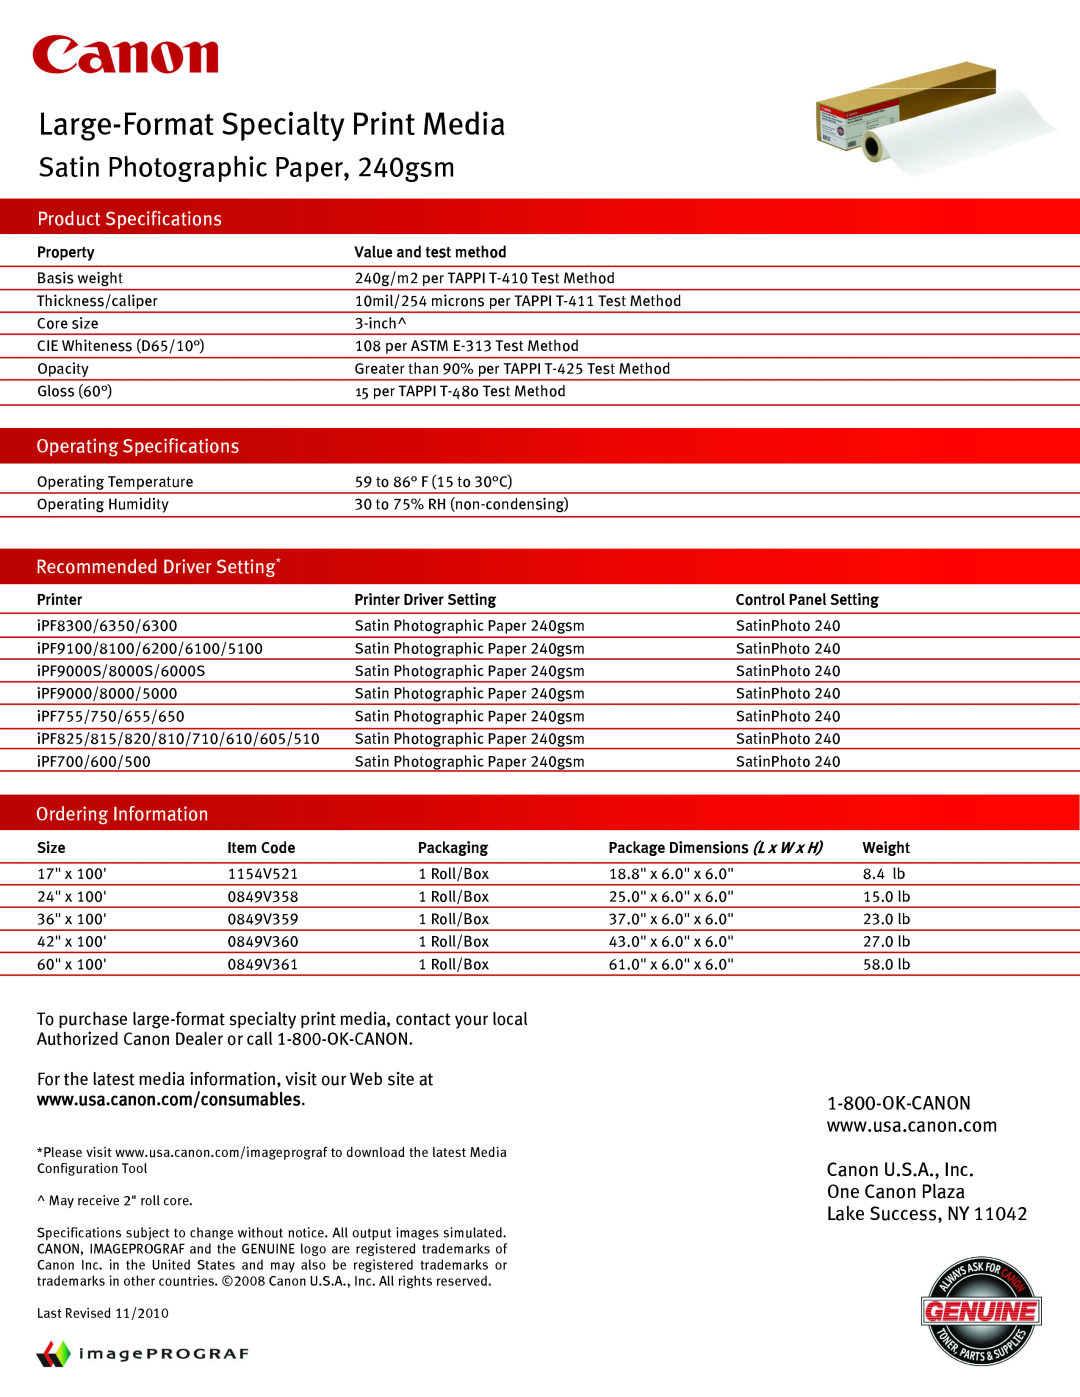 Canon Printer Accessories Large-Format Specialty Print Media, Satin Photographic Paper, 240gsm, Product Specifications 